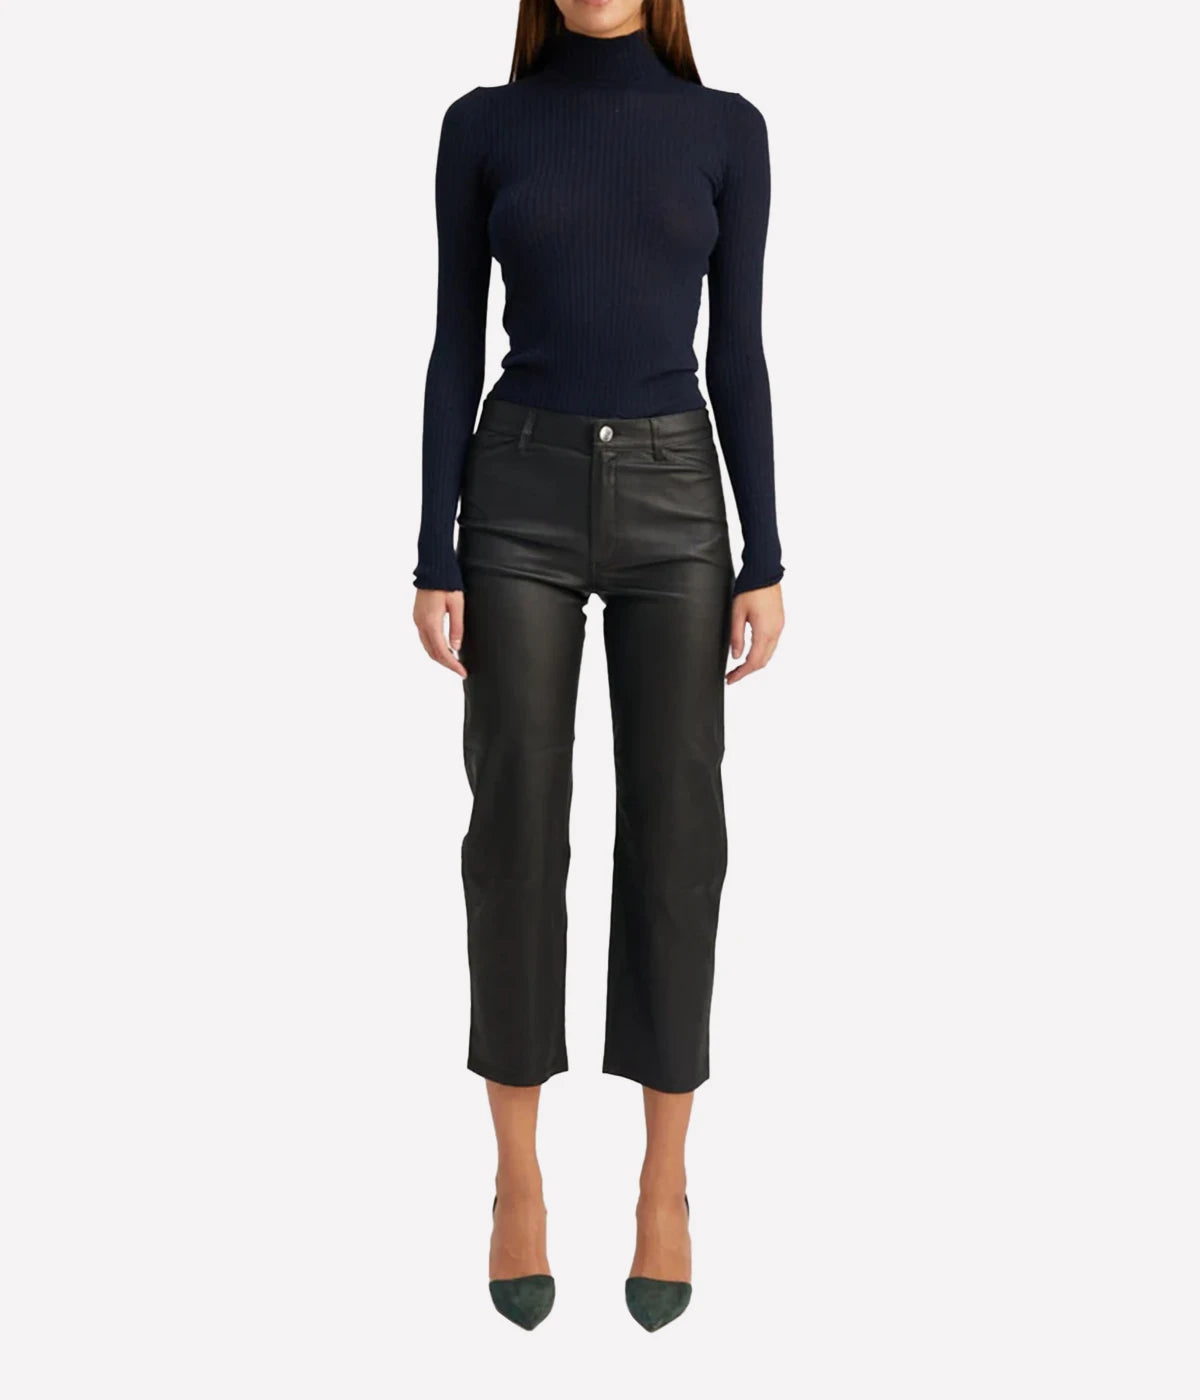 5 Pocket Straight Leg Leather Pant in Black